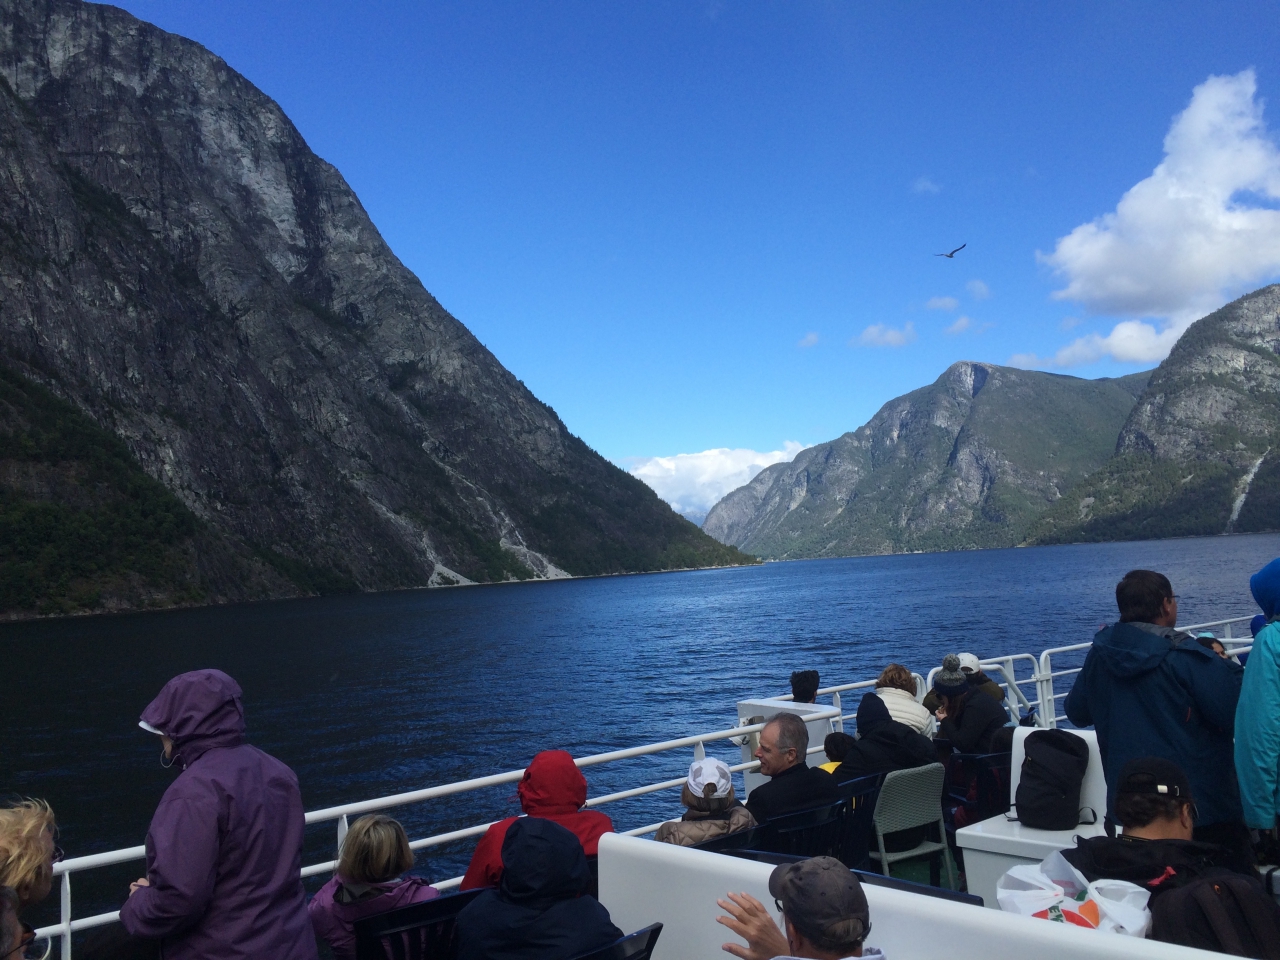 How to Explore Naeroyfjord and Sognefjord?